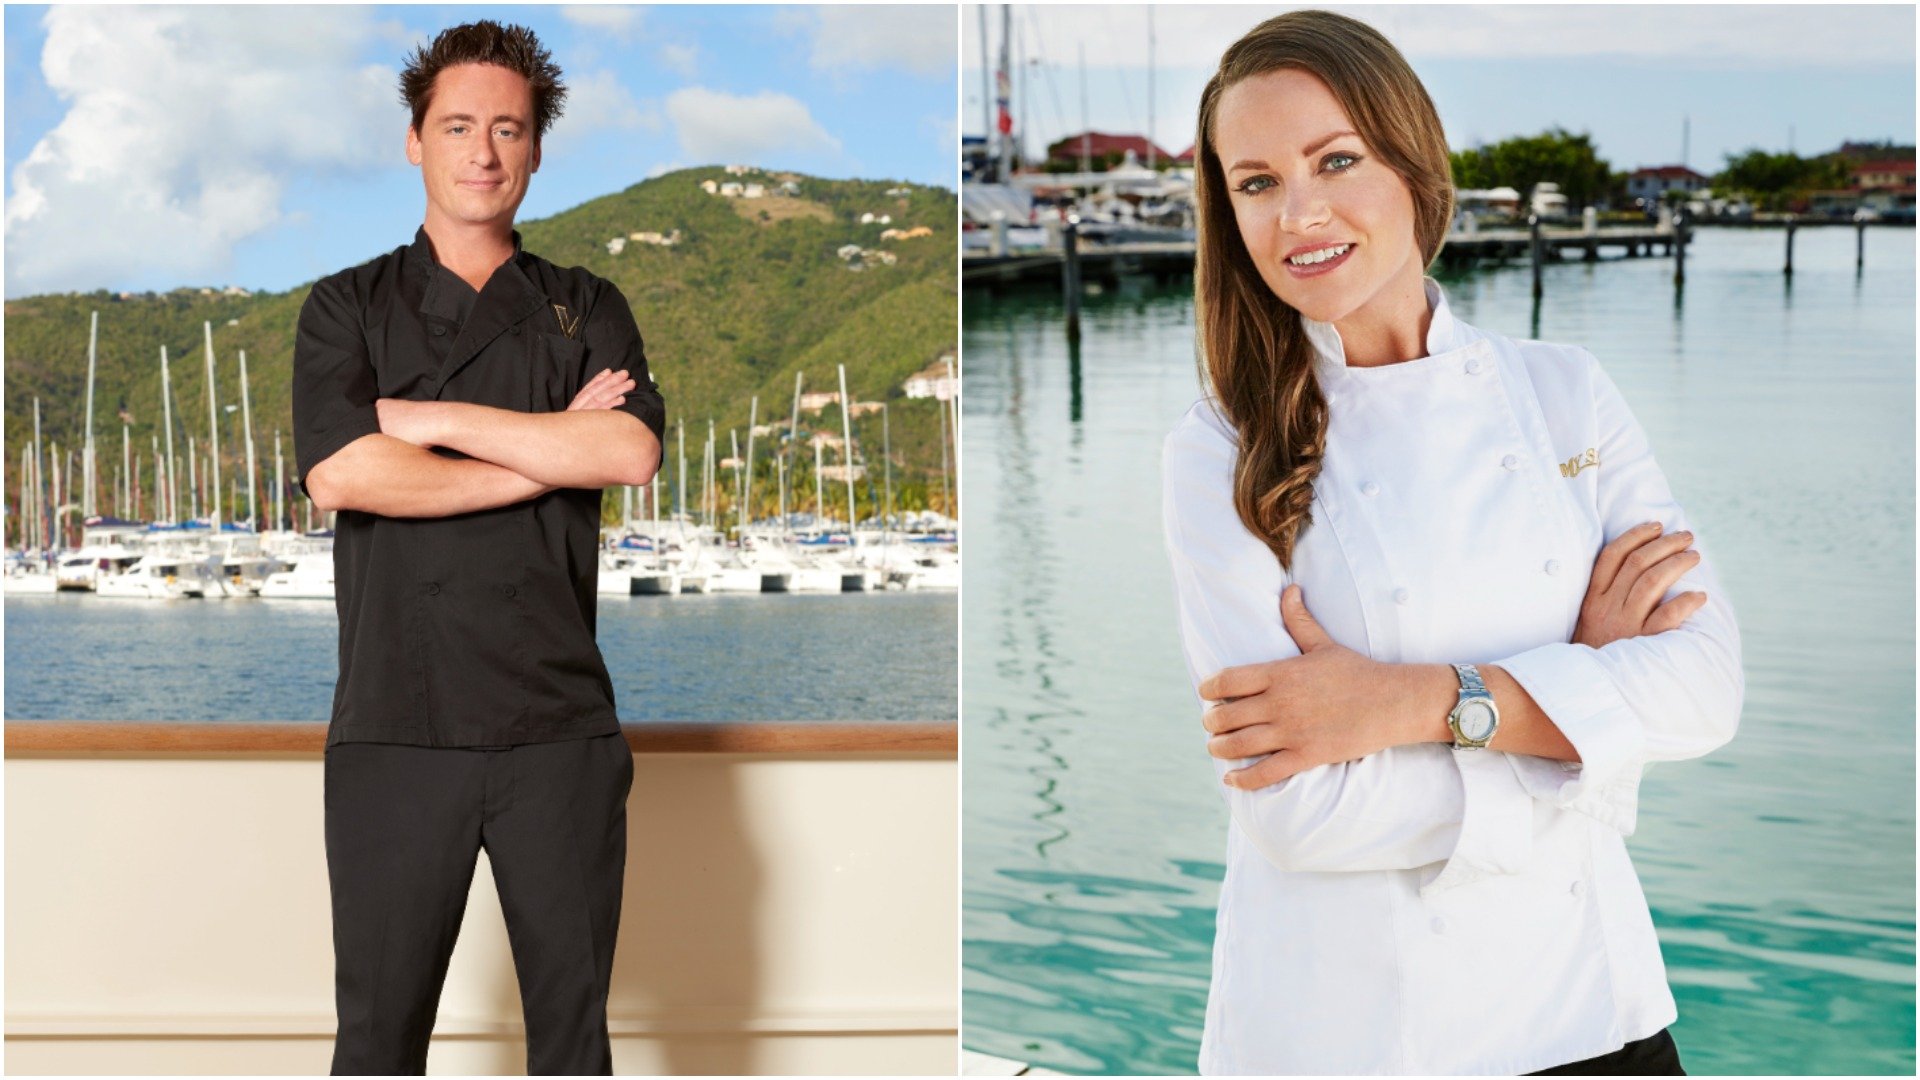 Chef Rachel and Chef Ben from Below Deck share some of their favorite dishes